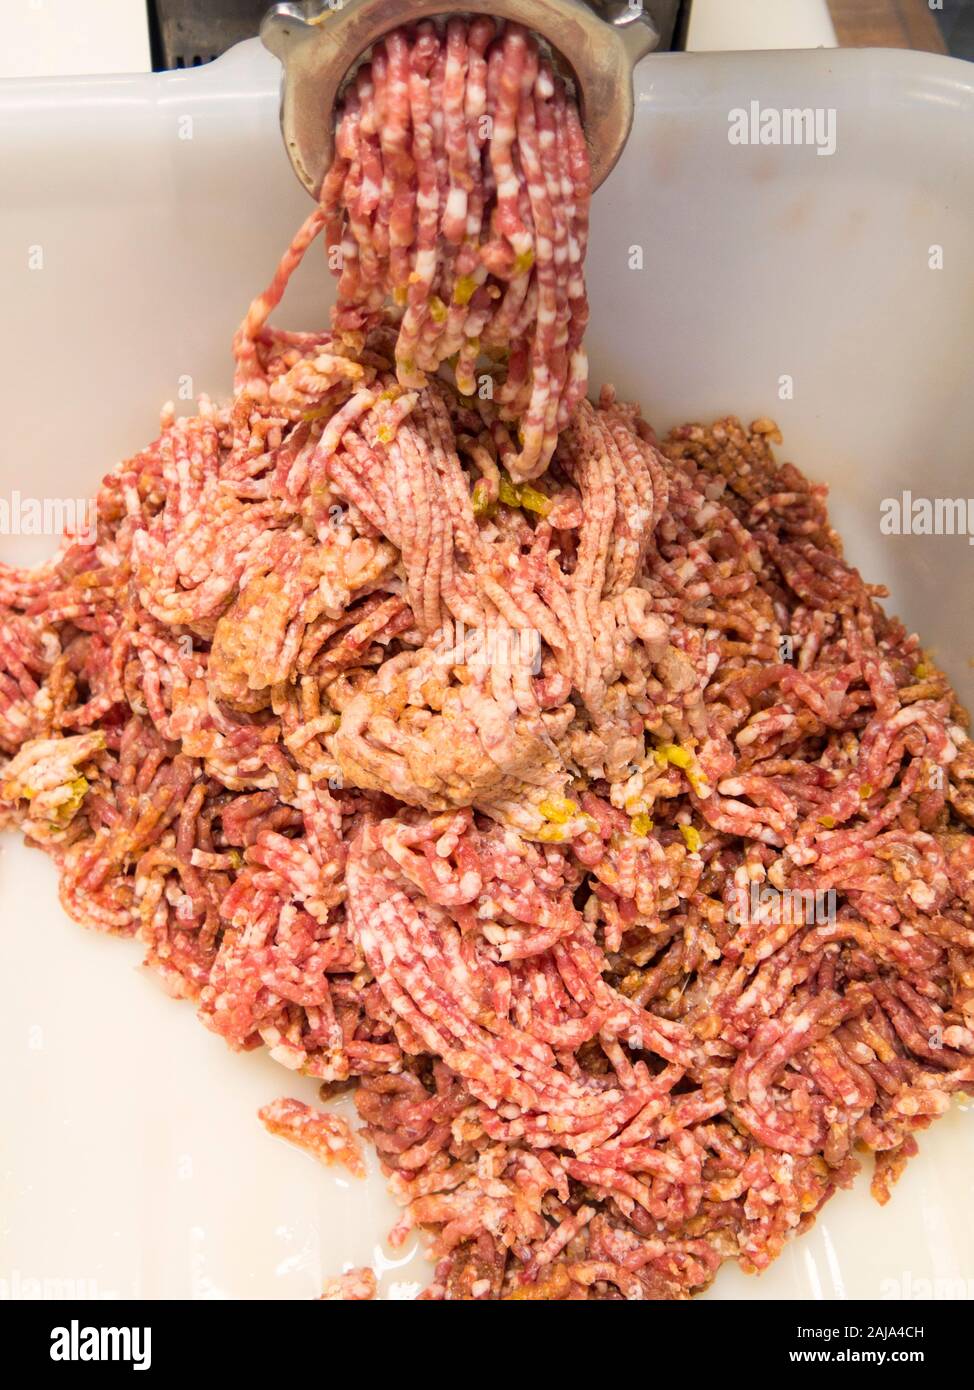 Minced Meat Coming Out From Grinder Healthy Homemade Minced Meat Dark  Background Horizontal View Photo Place For Copyspace Stock Photo - Download  Image Now - iStock